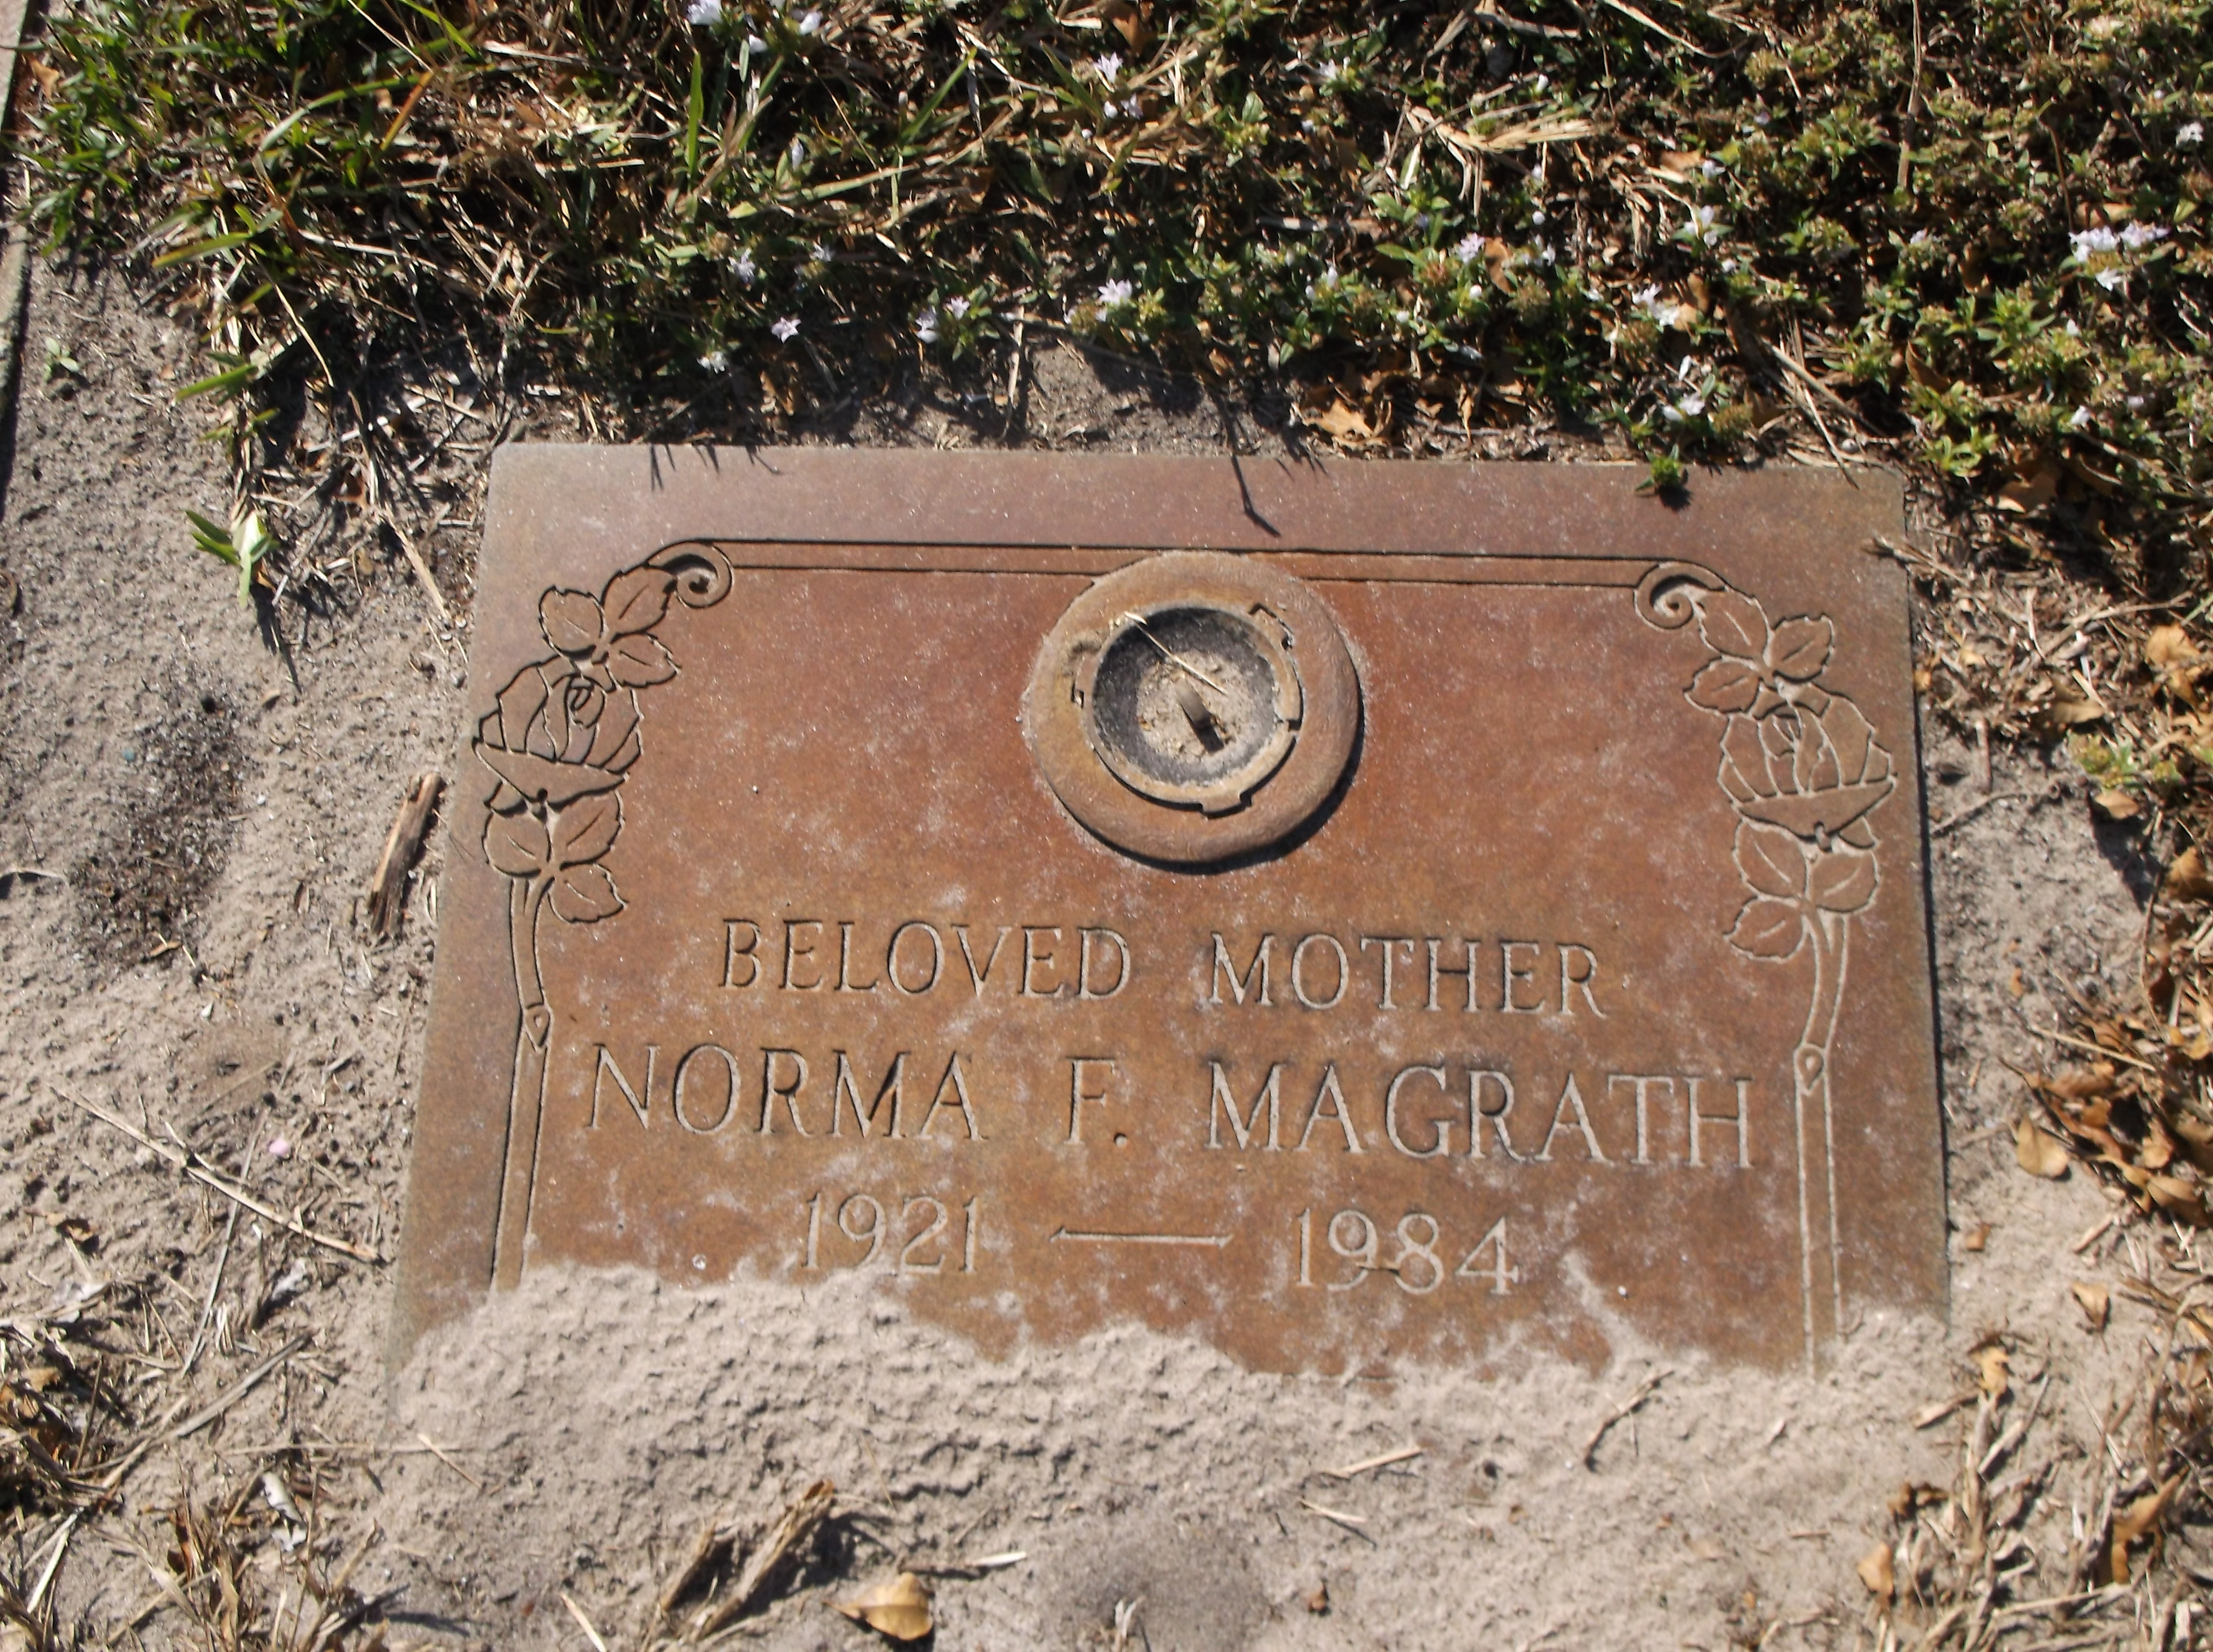 Norma F Magrath